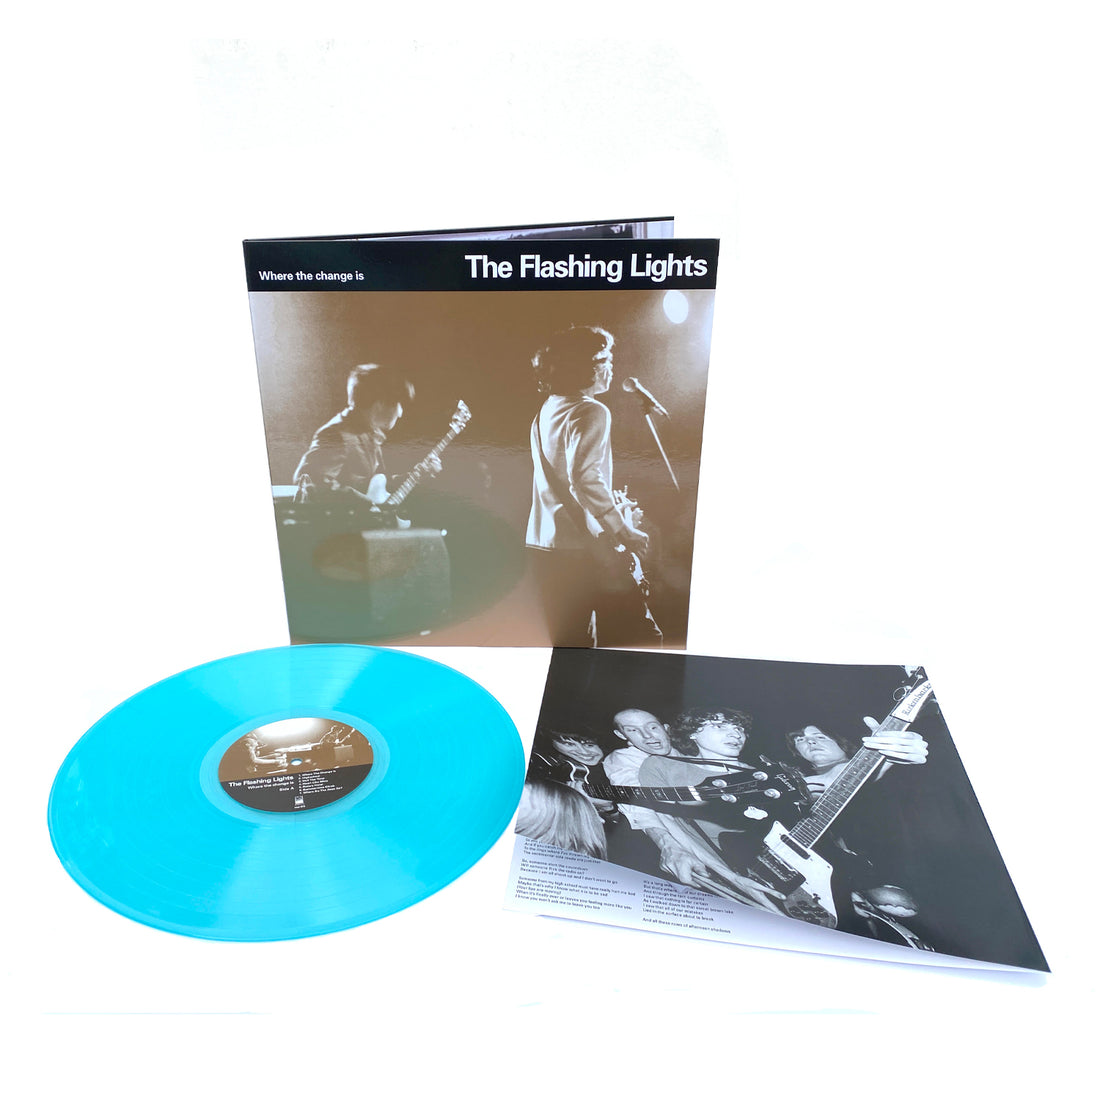 murderecords - Flashing Lights - Where the Change Is LP